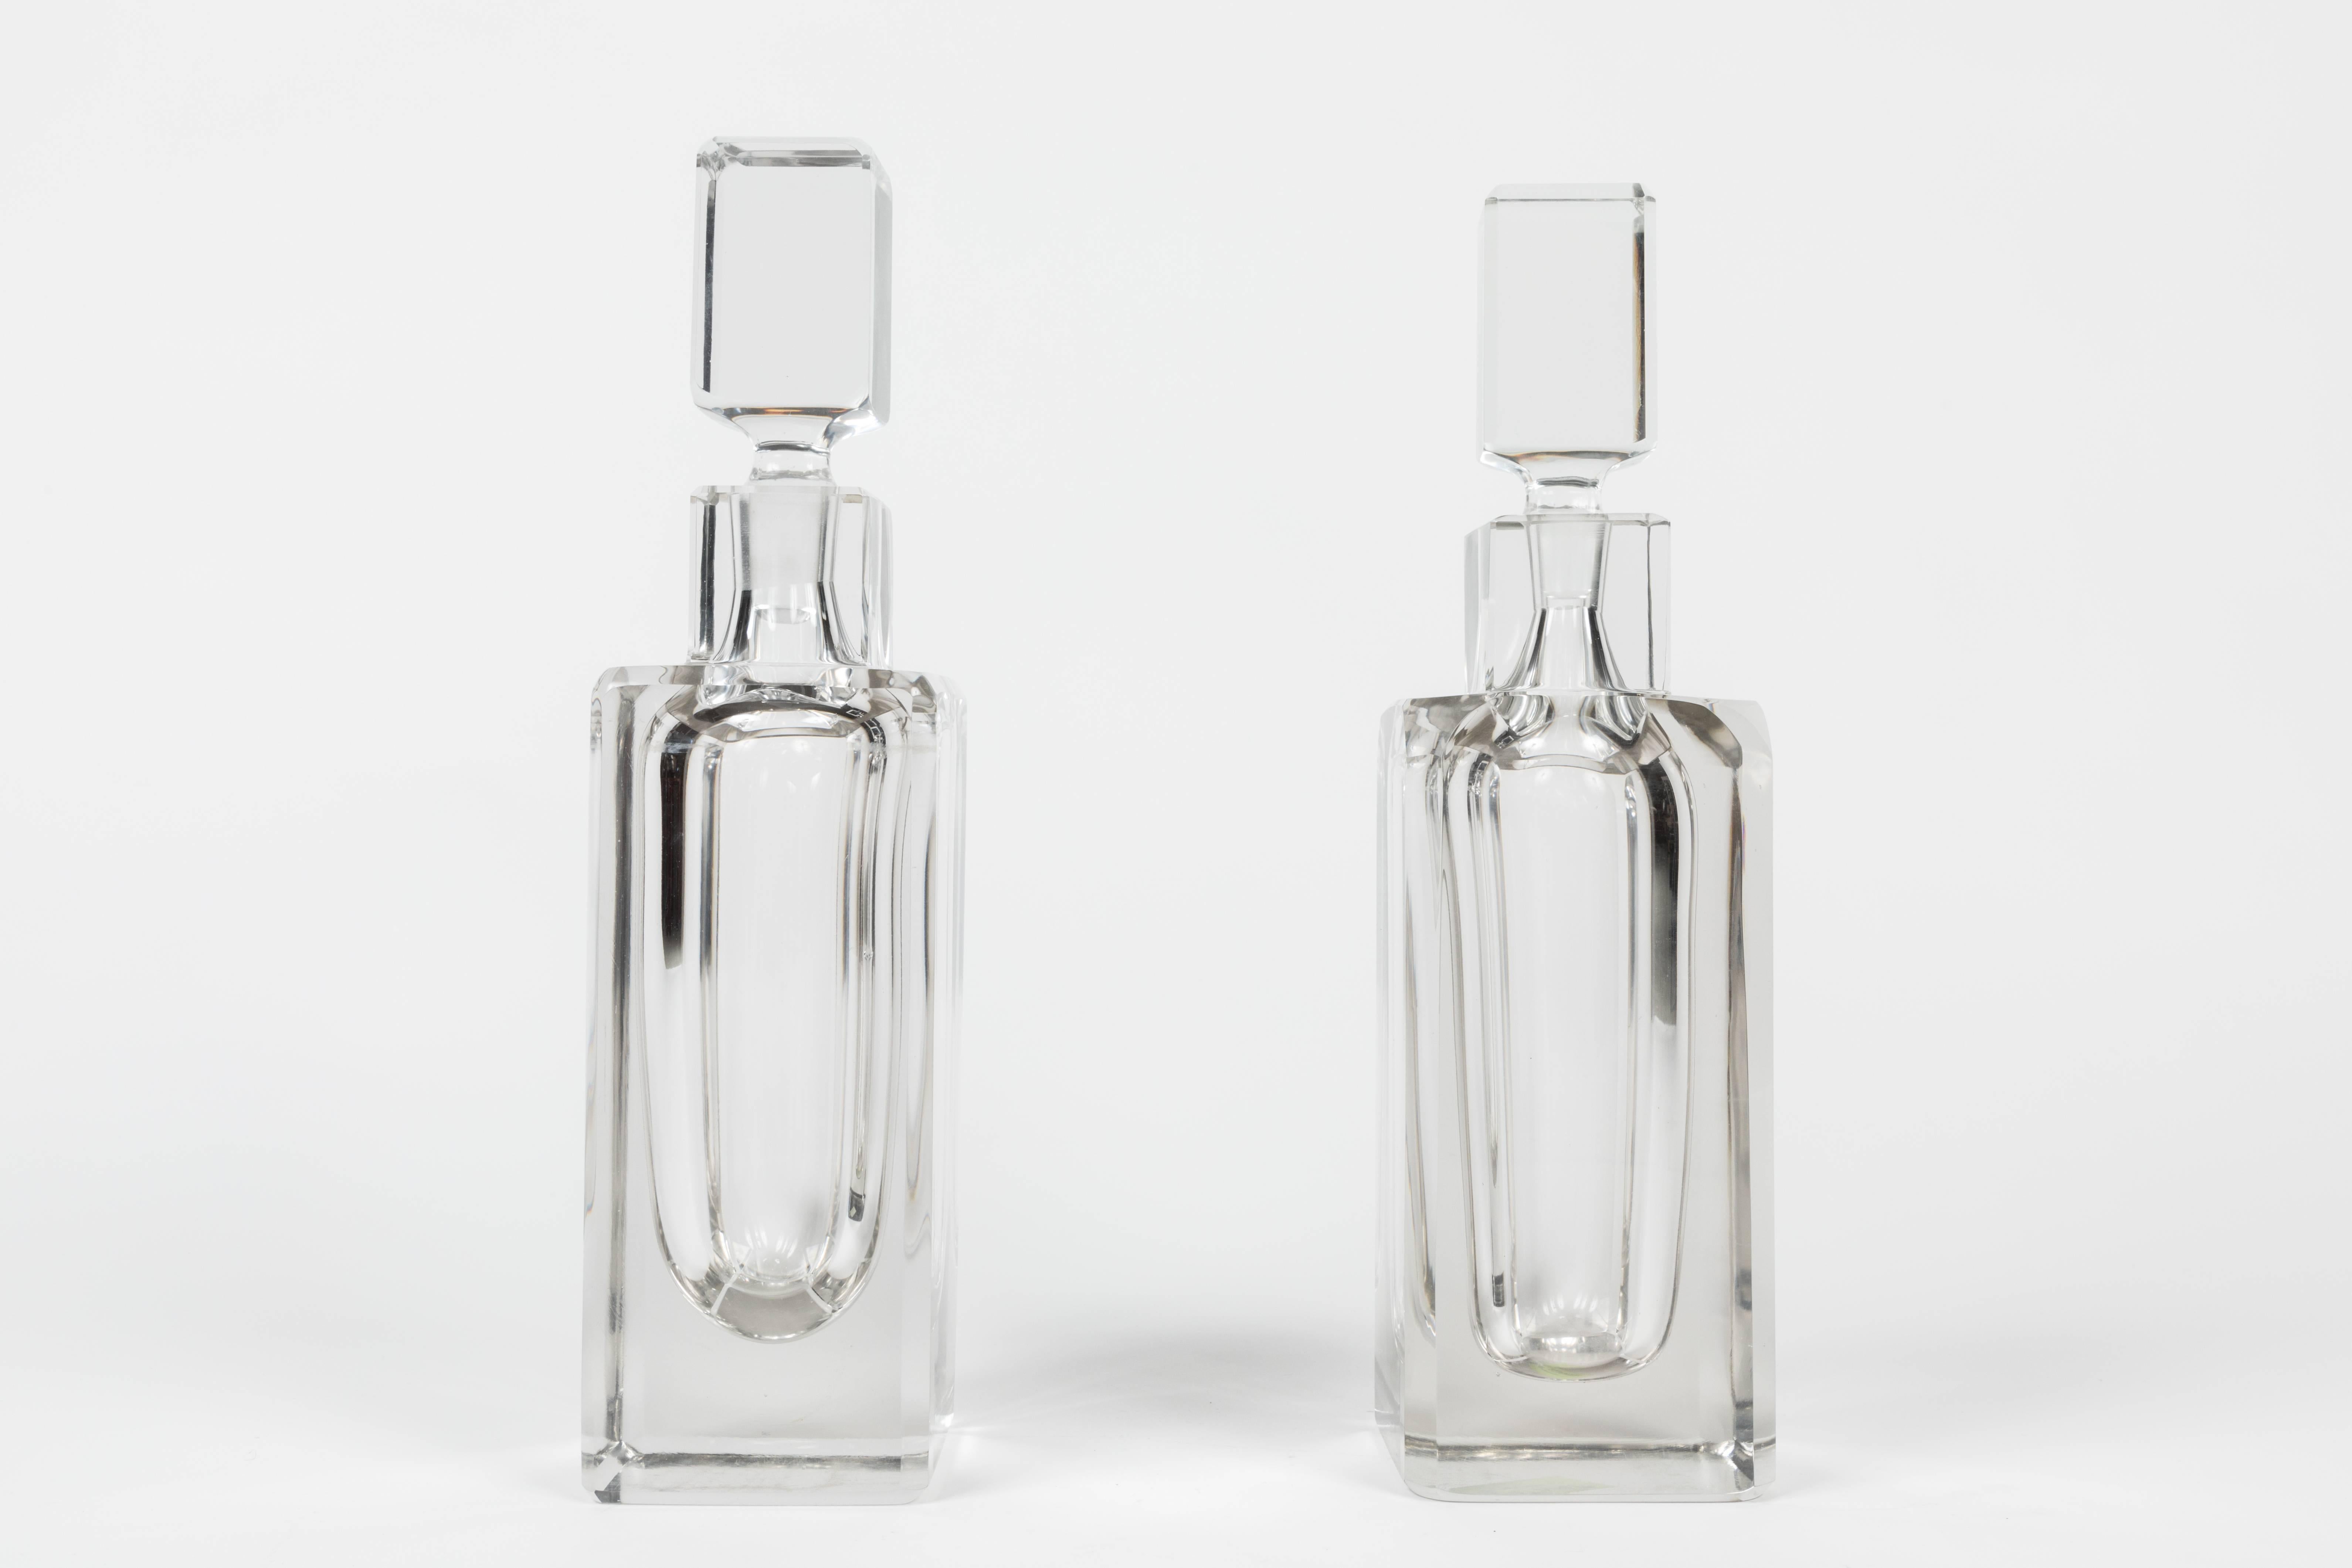 Beautiful period Art Deco decanters in Fine crystal.  Decanters are very heavy as the walls are very hick.  Super stylish one of the decanters retains a “Czechoslovakian acid stamp” on the underside.